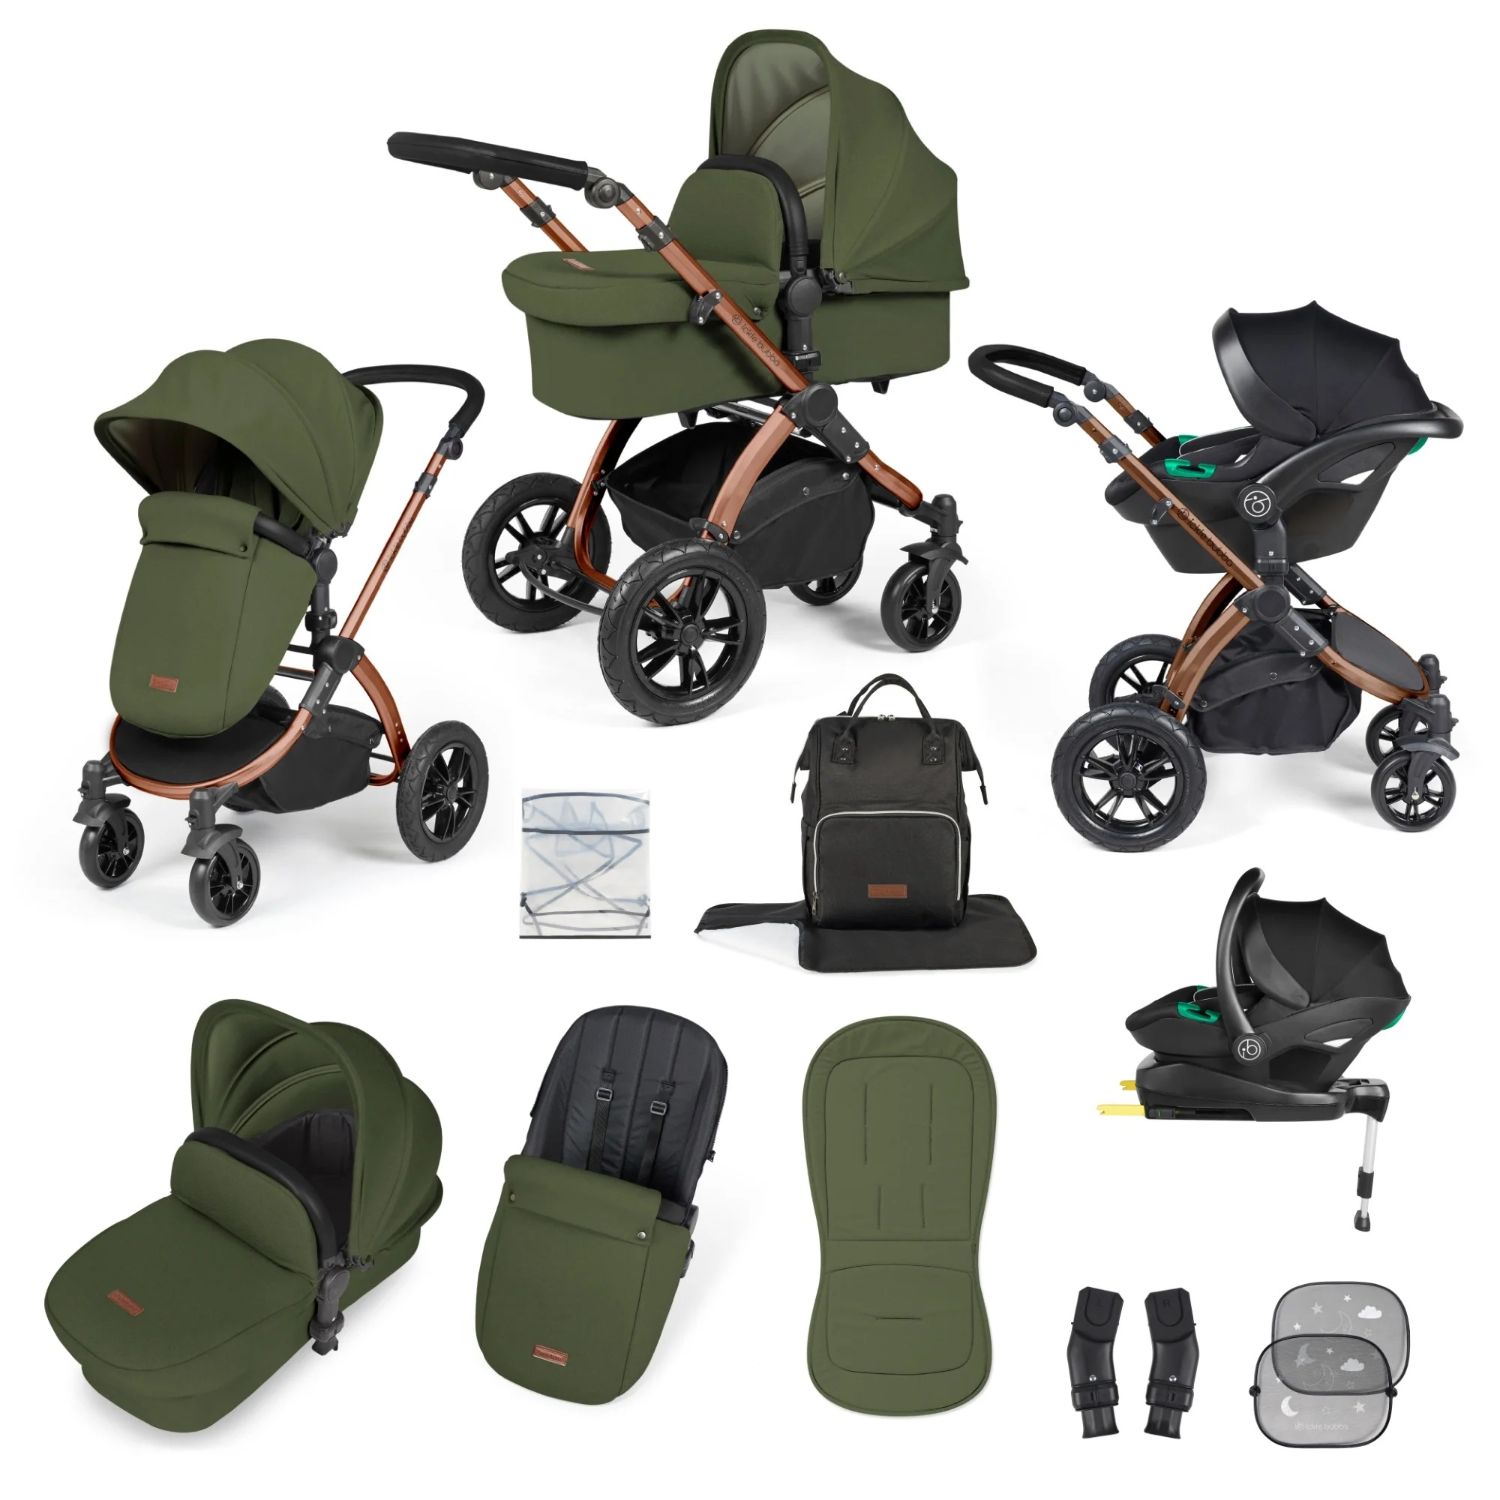 Ickle Bubba Stomp Luxe All-in-One Travel System with Stratus i-Size Car Seat and ISOFIX Base and accessories in Woodland green colour with bronze chassis